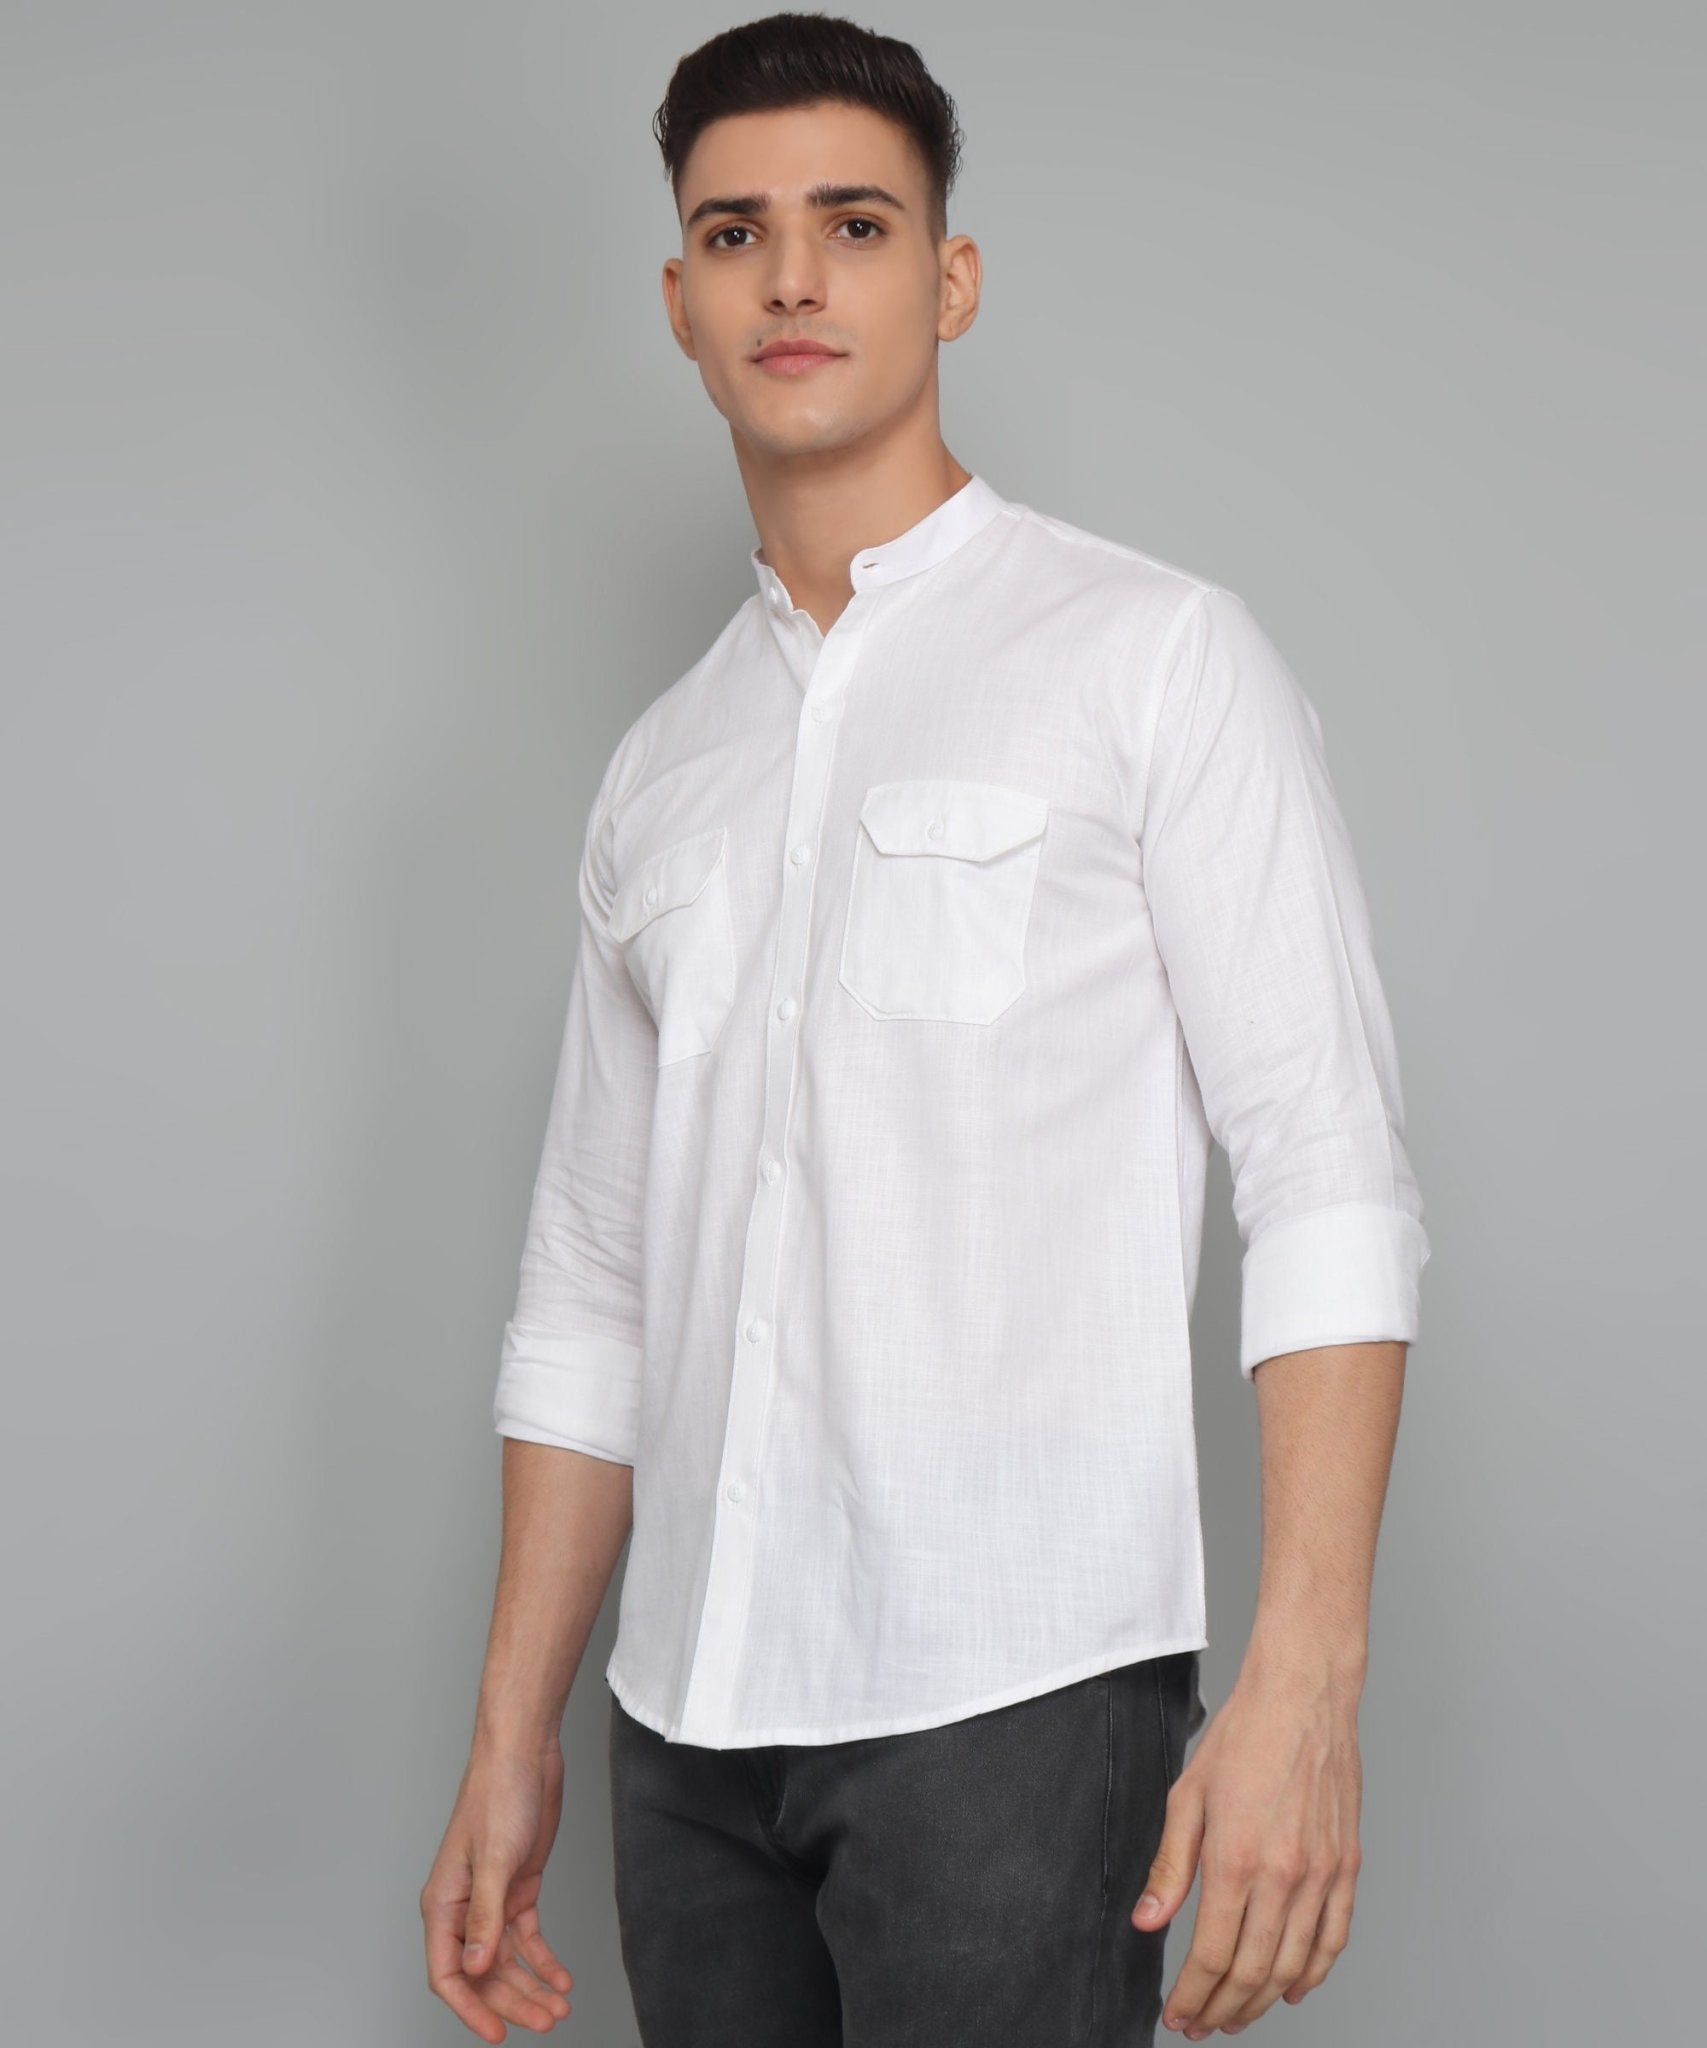 Fancy Fabulous TryBuy Premium White Solid Cotton Linen Casual Double Pocket Shirt - TryBuy® USA🇺🇸